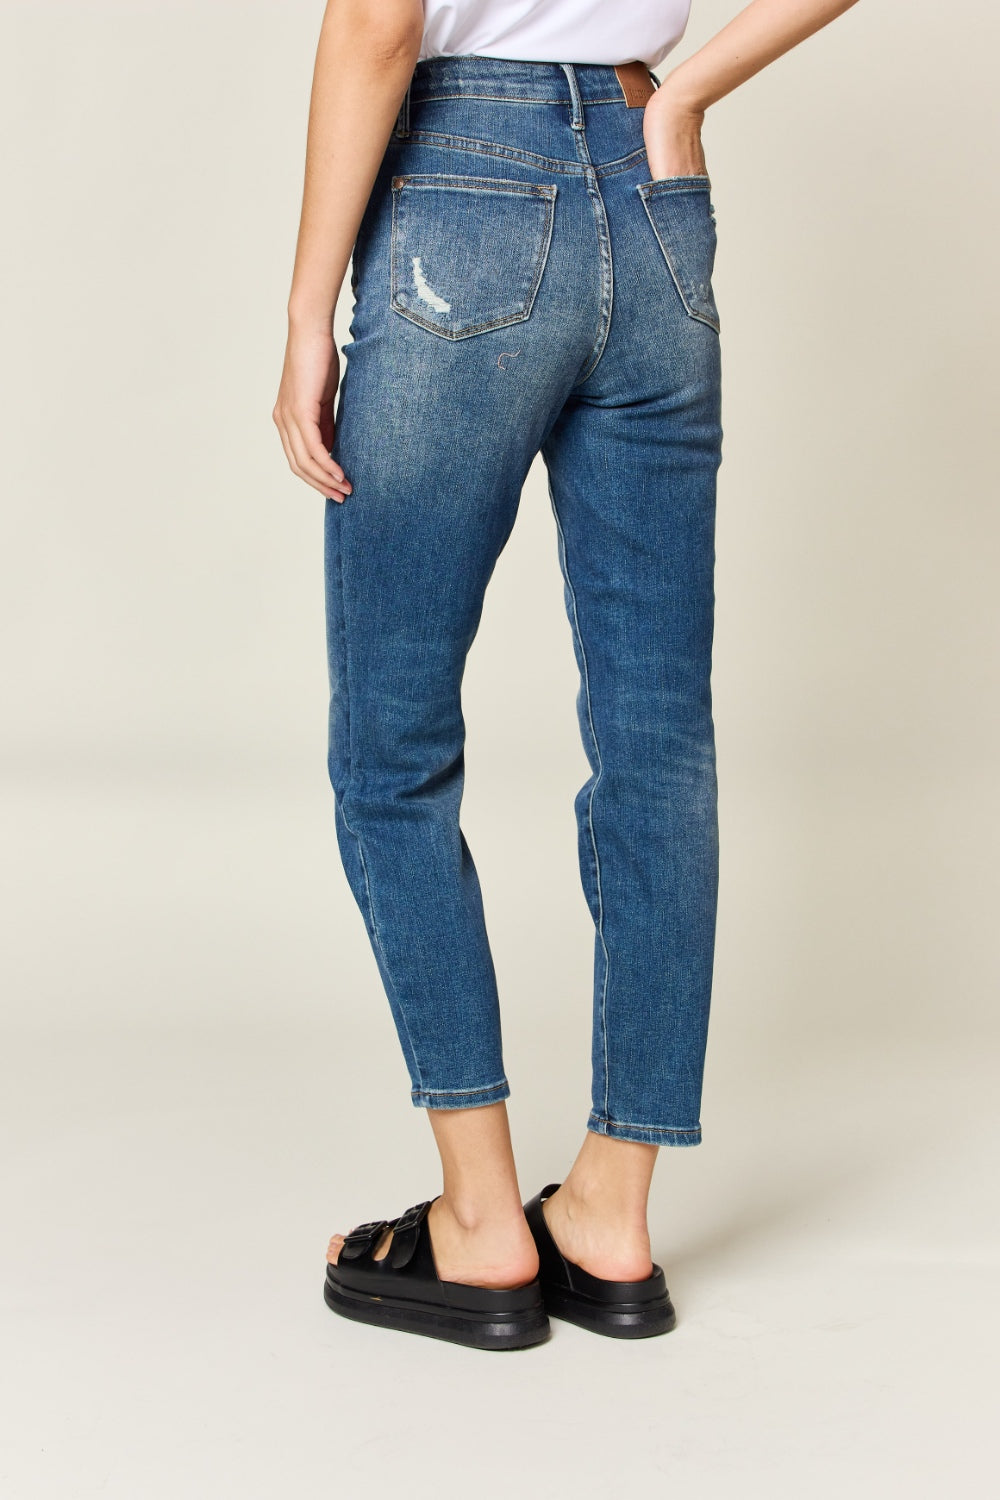 Back View, Tummy Control High Waist Slim Fit Jeans Style 88776